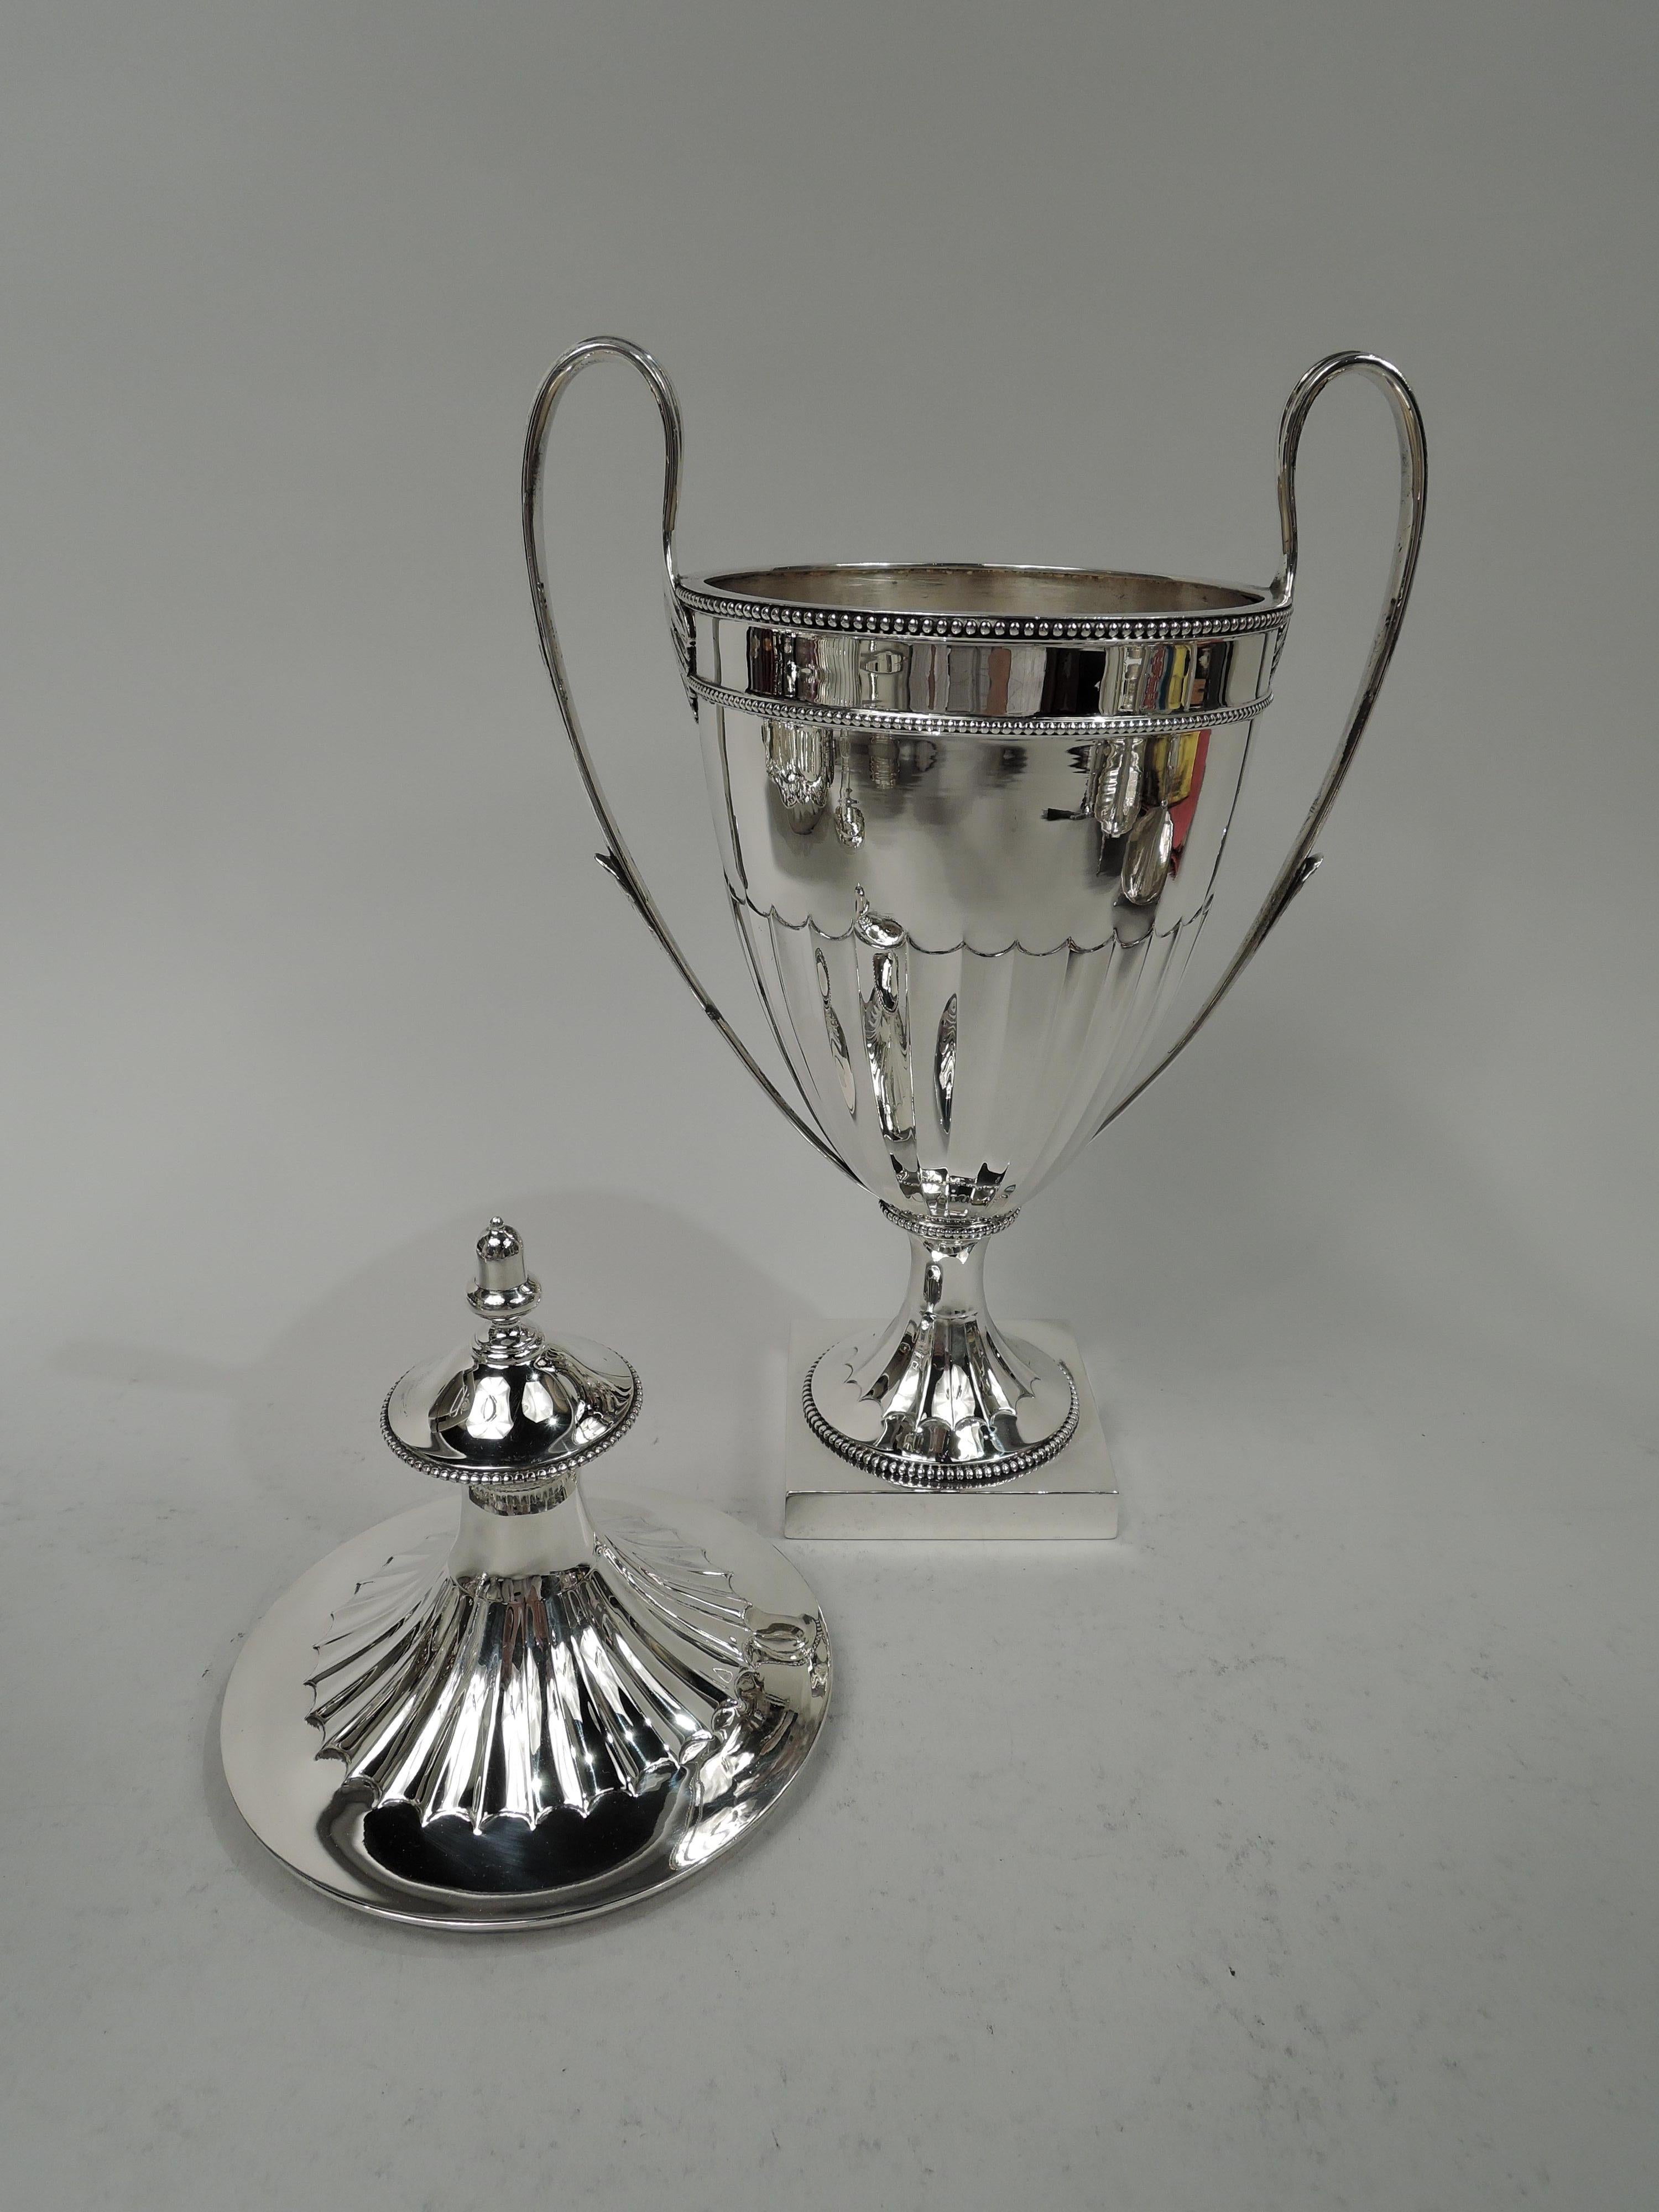 Neoclassical Revival Antique English Edwardian Classical Sterling Silver Covered Urn For Sale